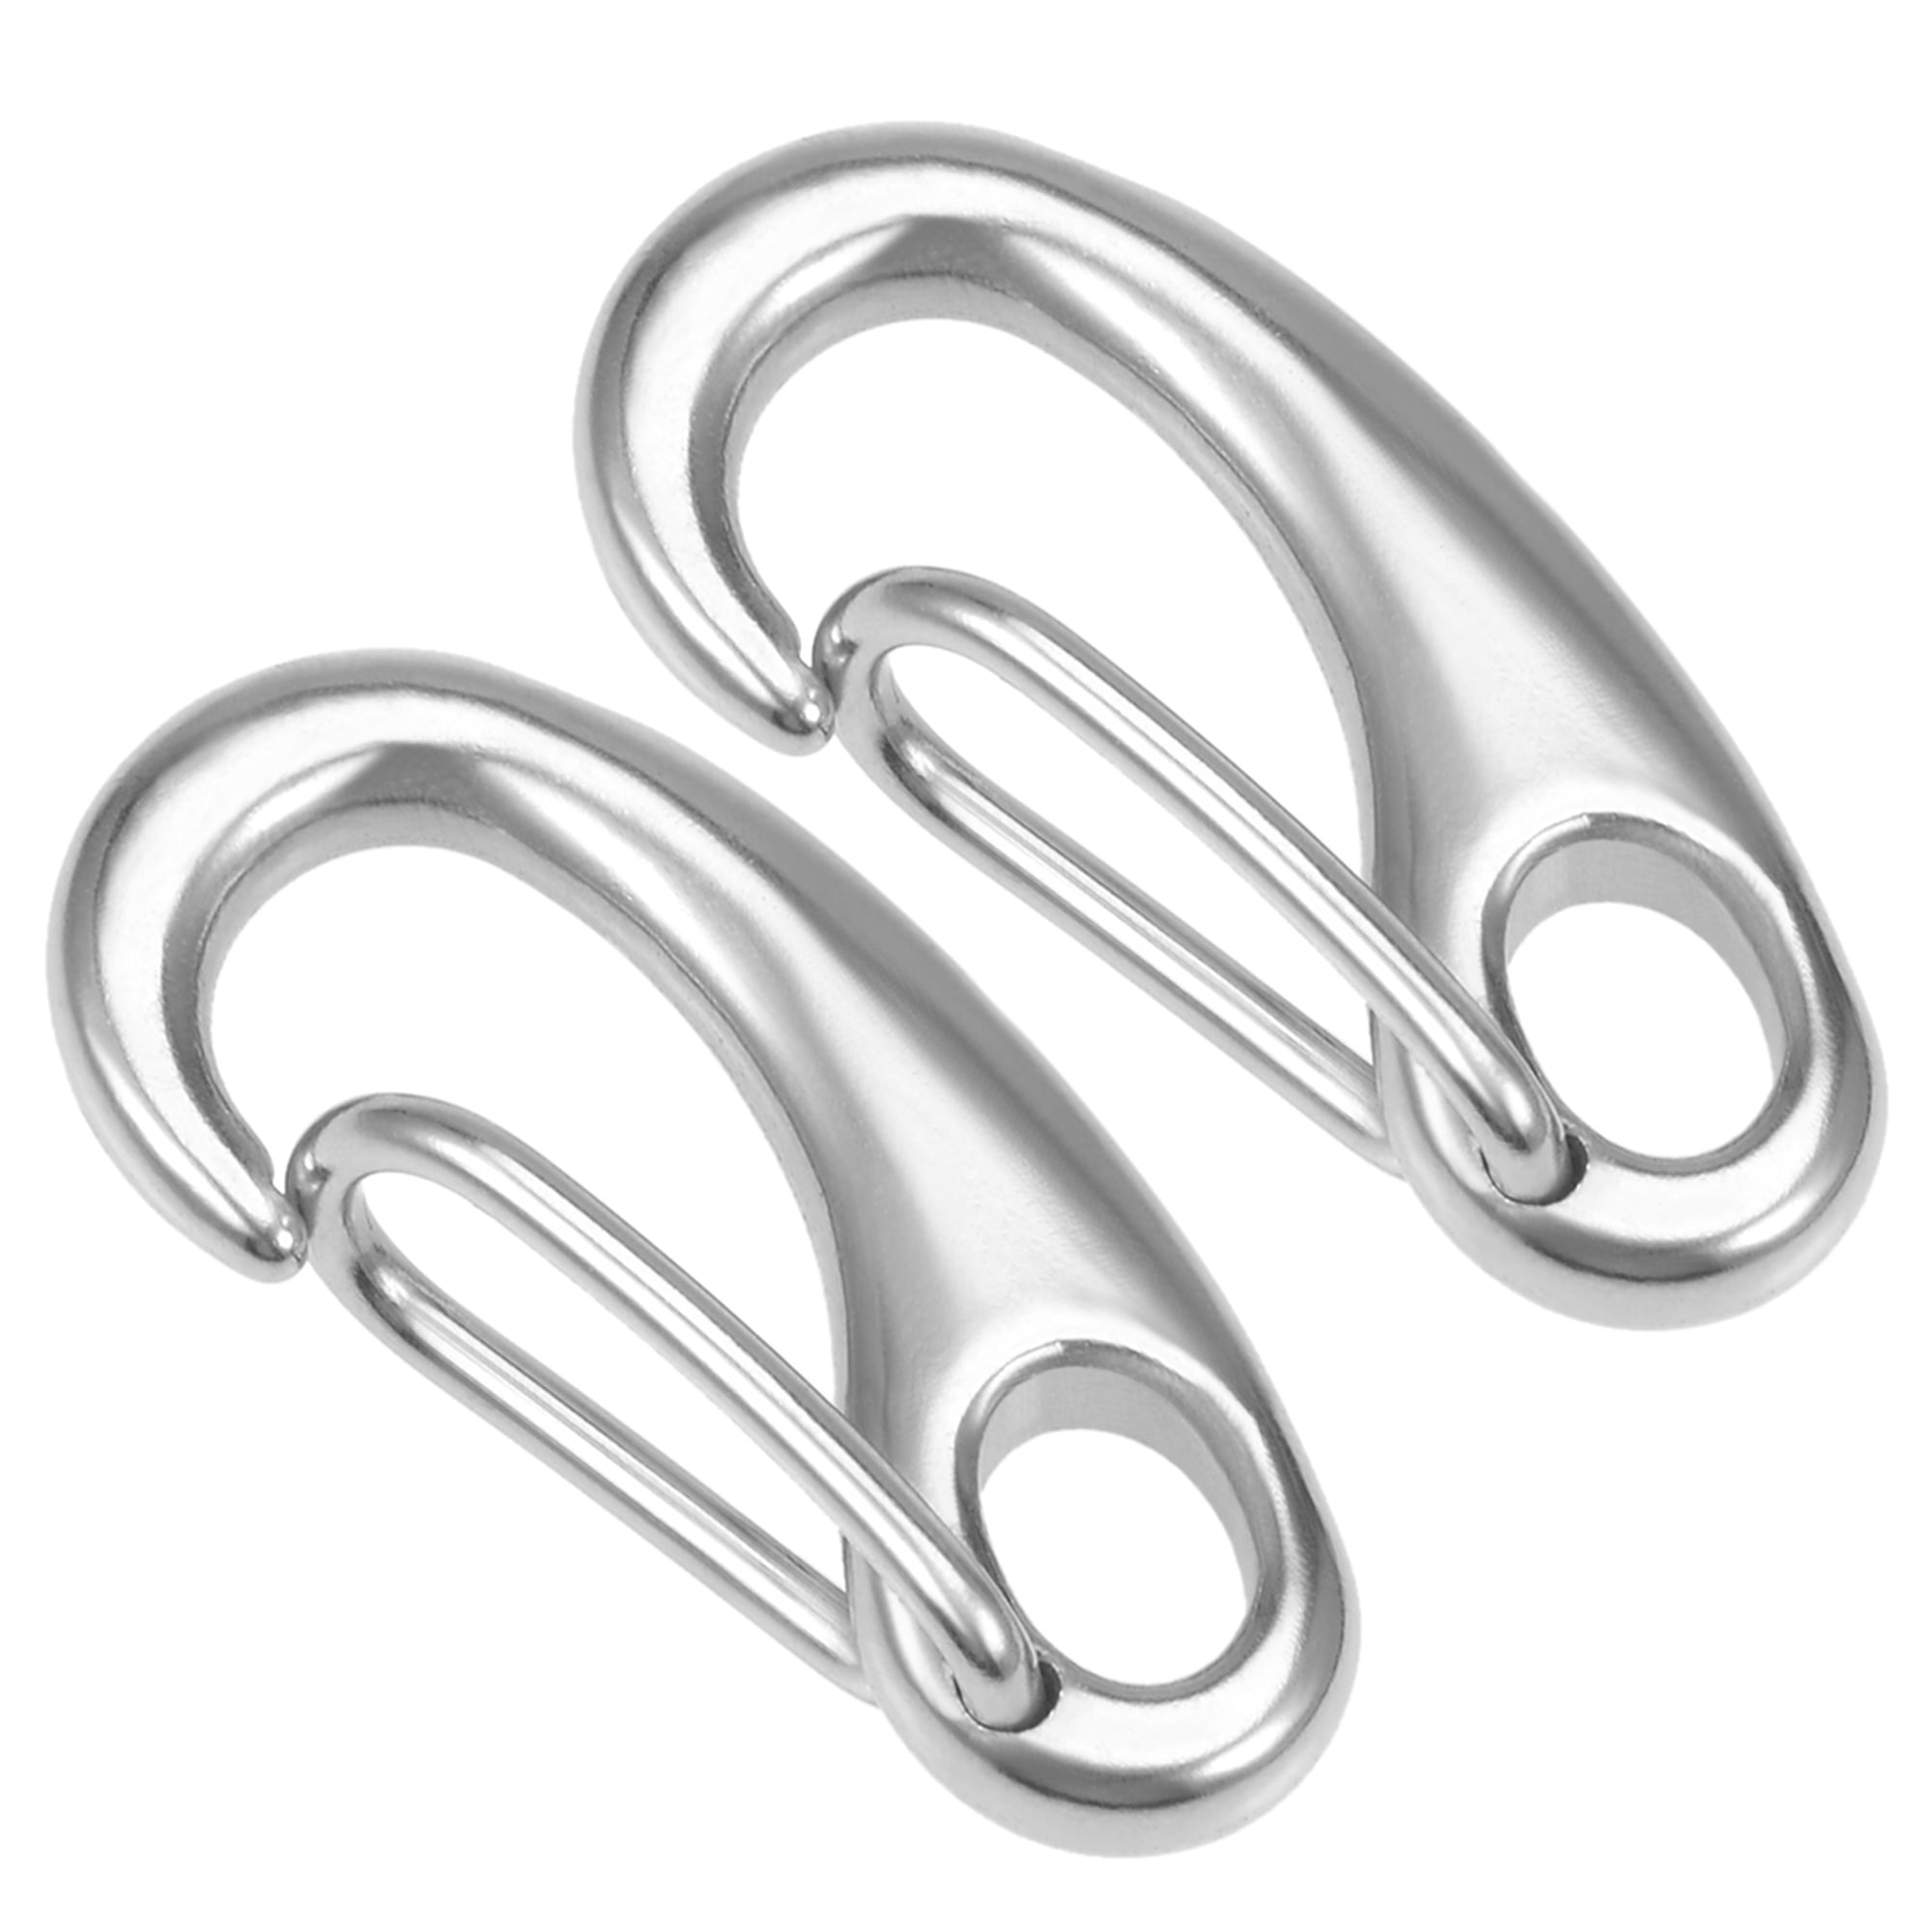 hiking U/D Carabiner Clip Heavy Duty Snap Hook 304 Stainless Steel M6 Carabiner Snap Hook Gauge Spring Clip Keychain,Holds Up Max to 264 lb/120kg for outdoor activity,camping keychain etc fishing